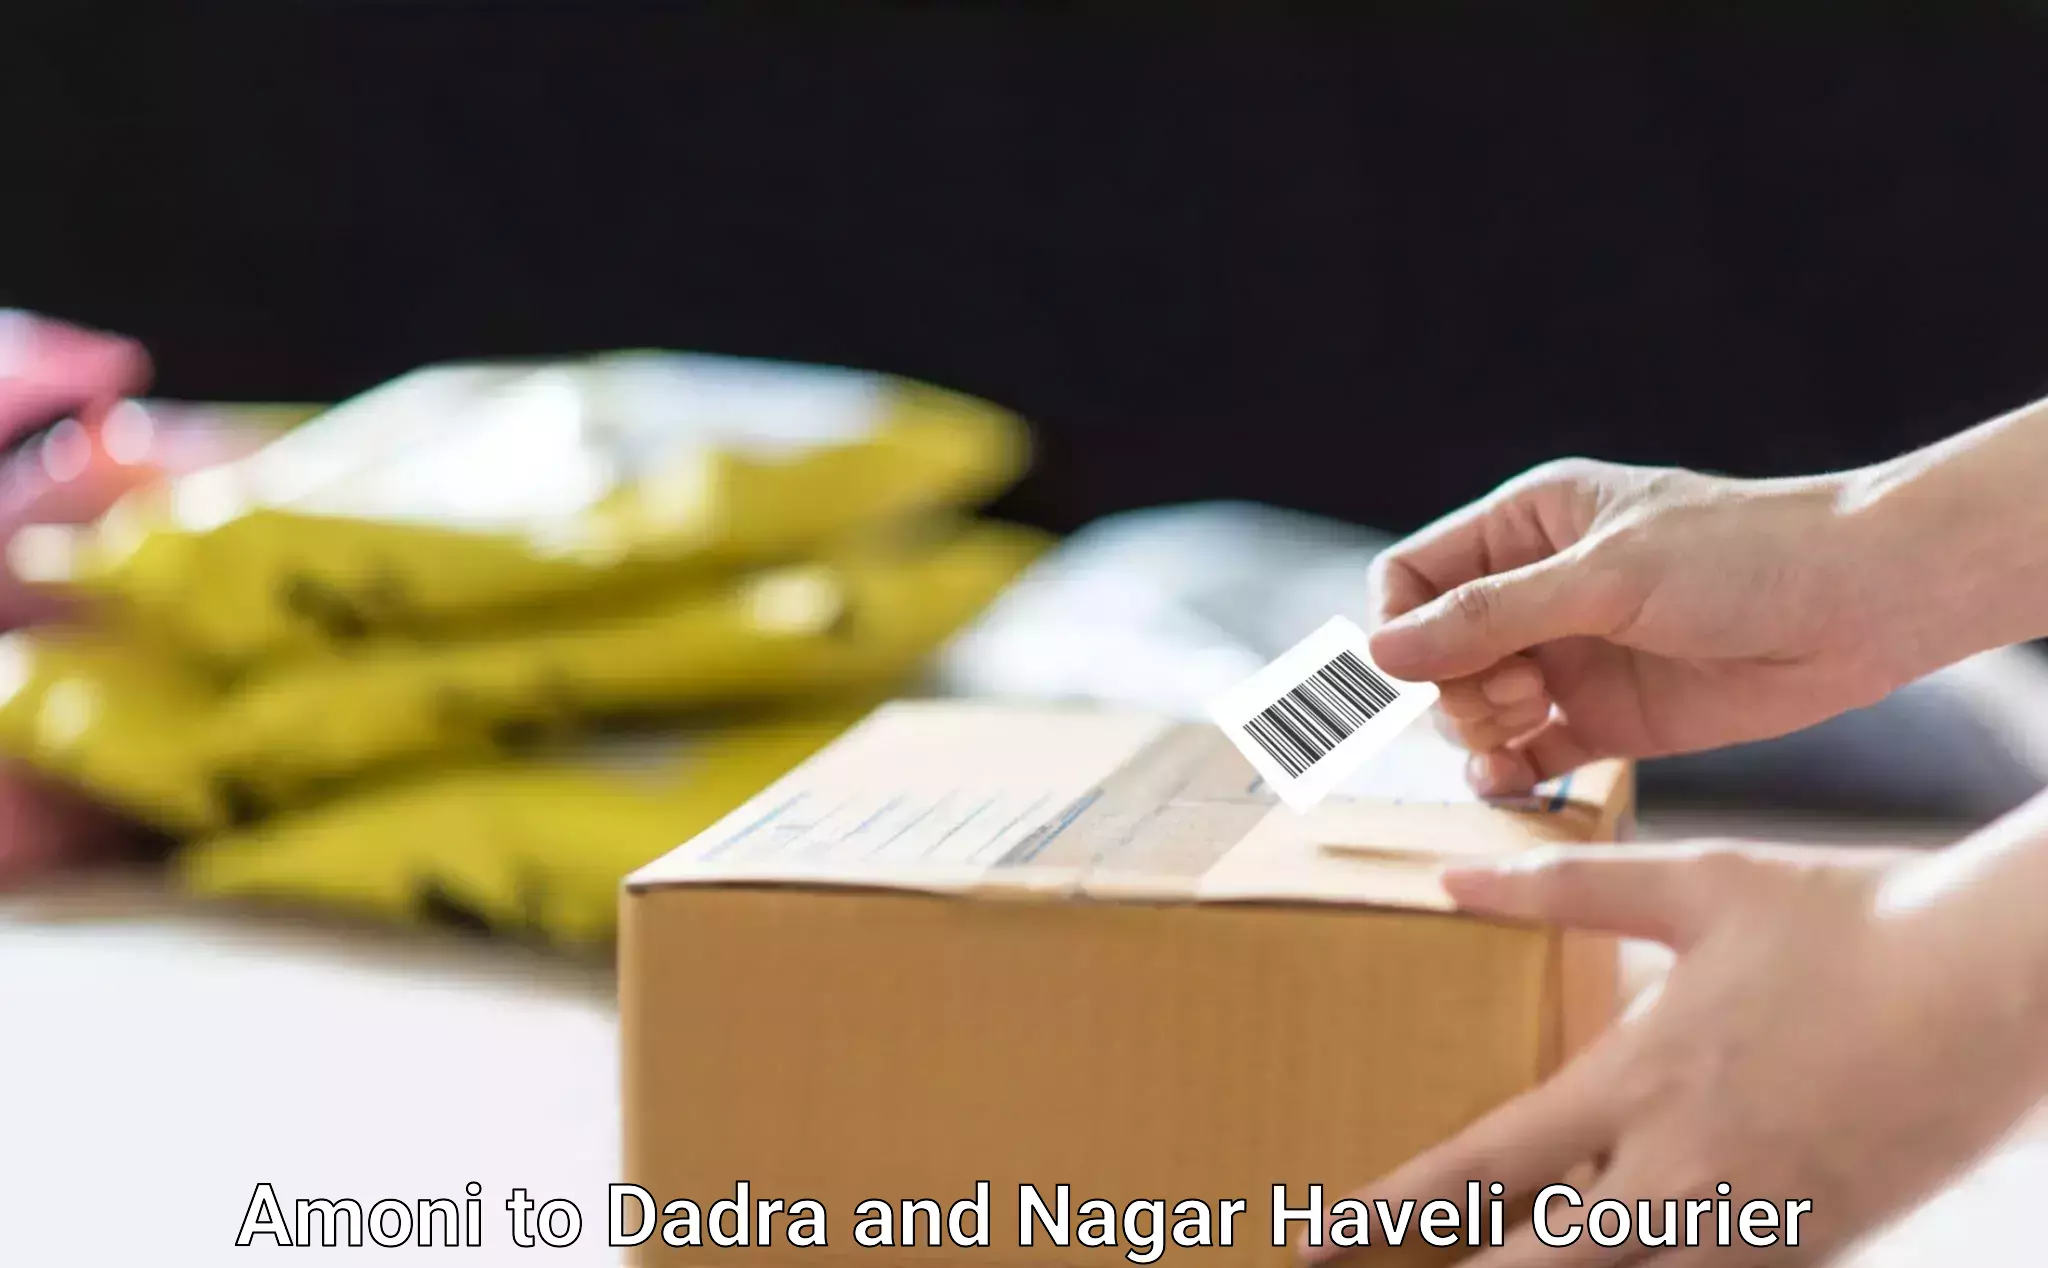 Express delivery capabilities in Amoni to Dadra and Nagar Haveli